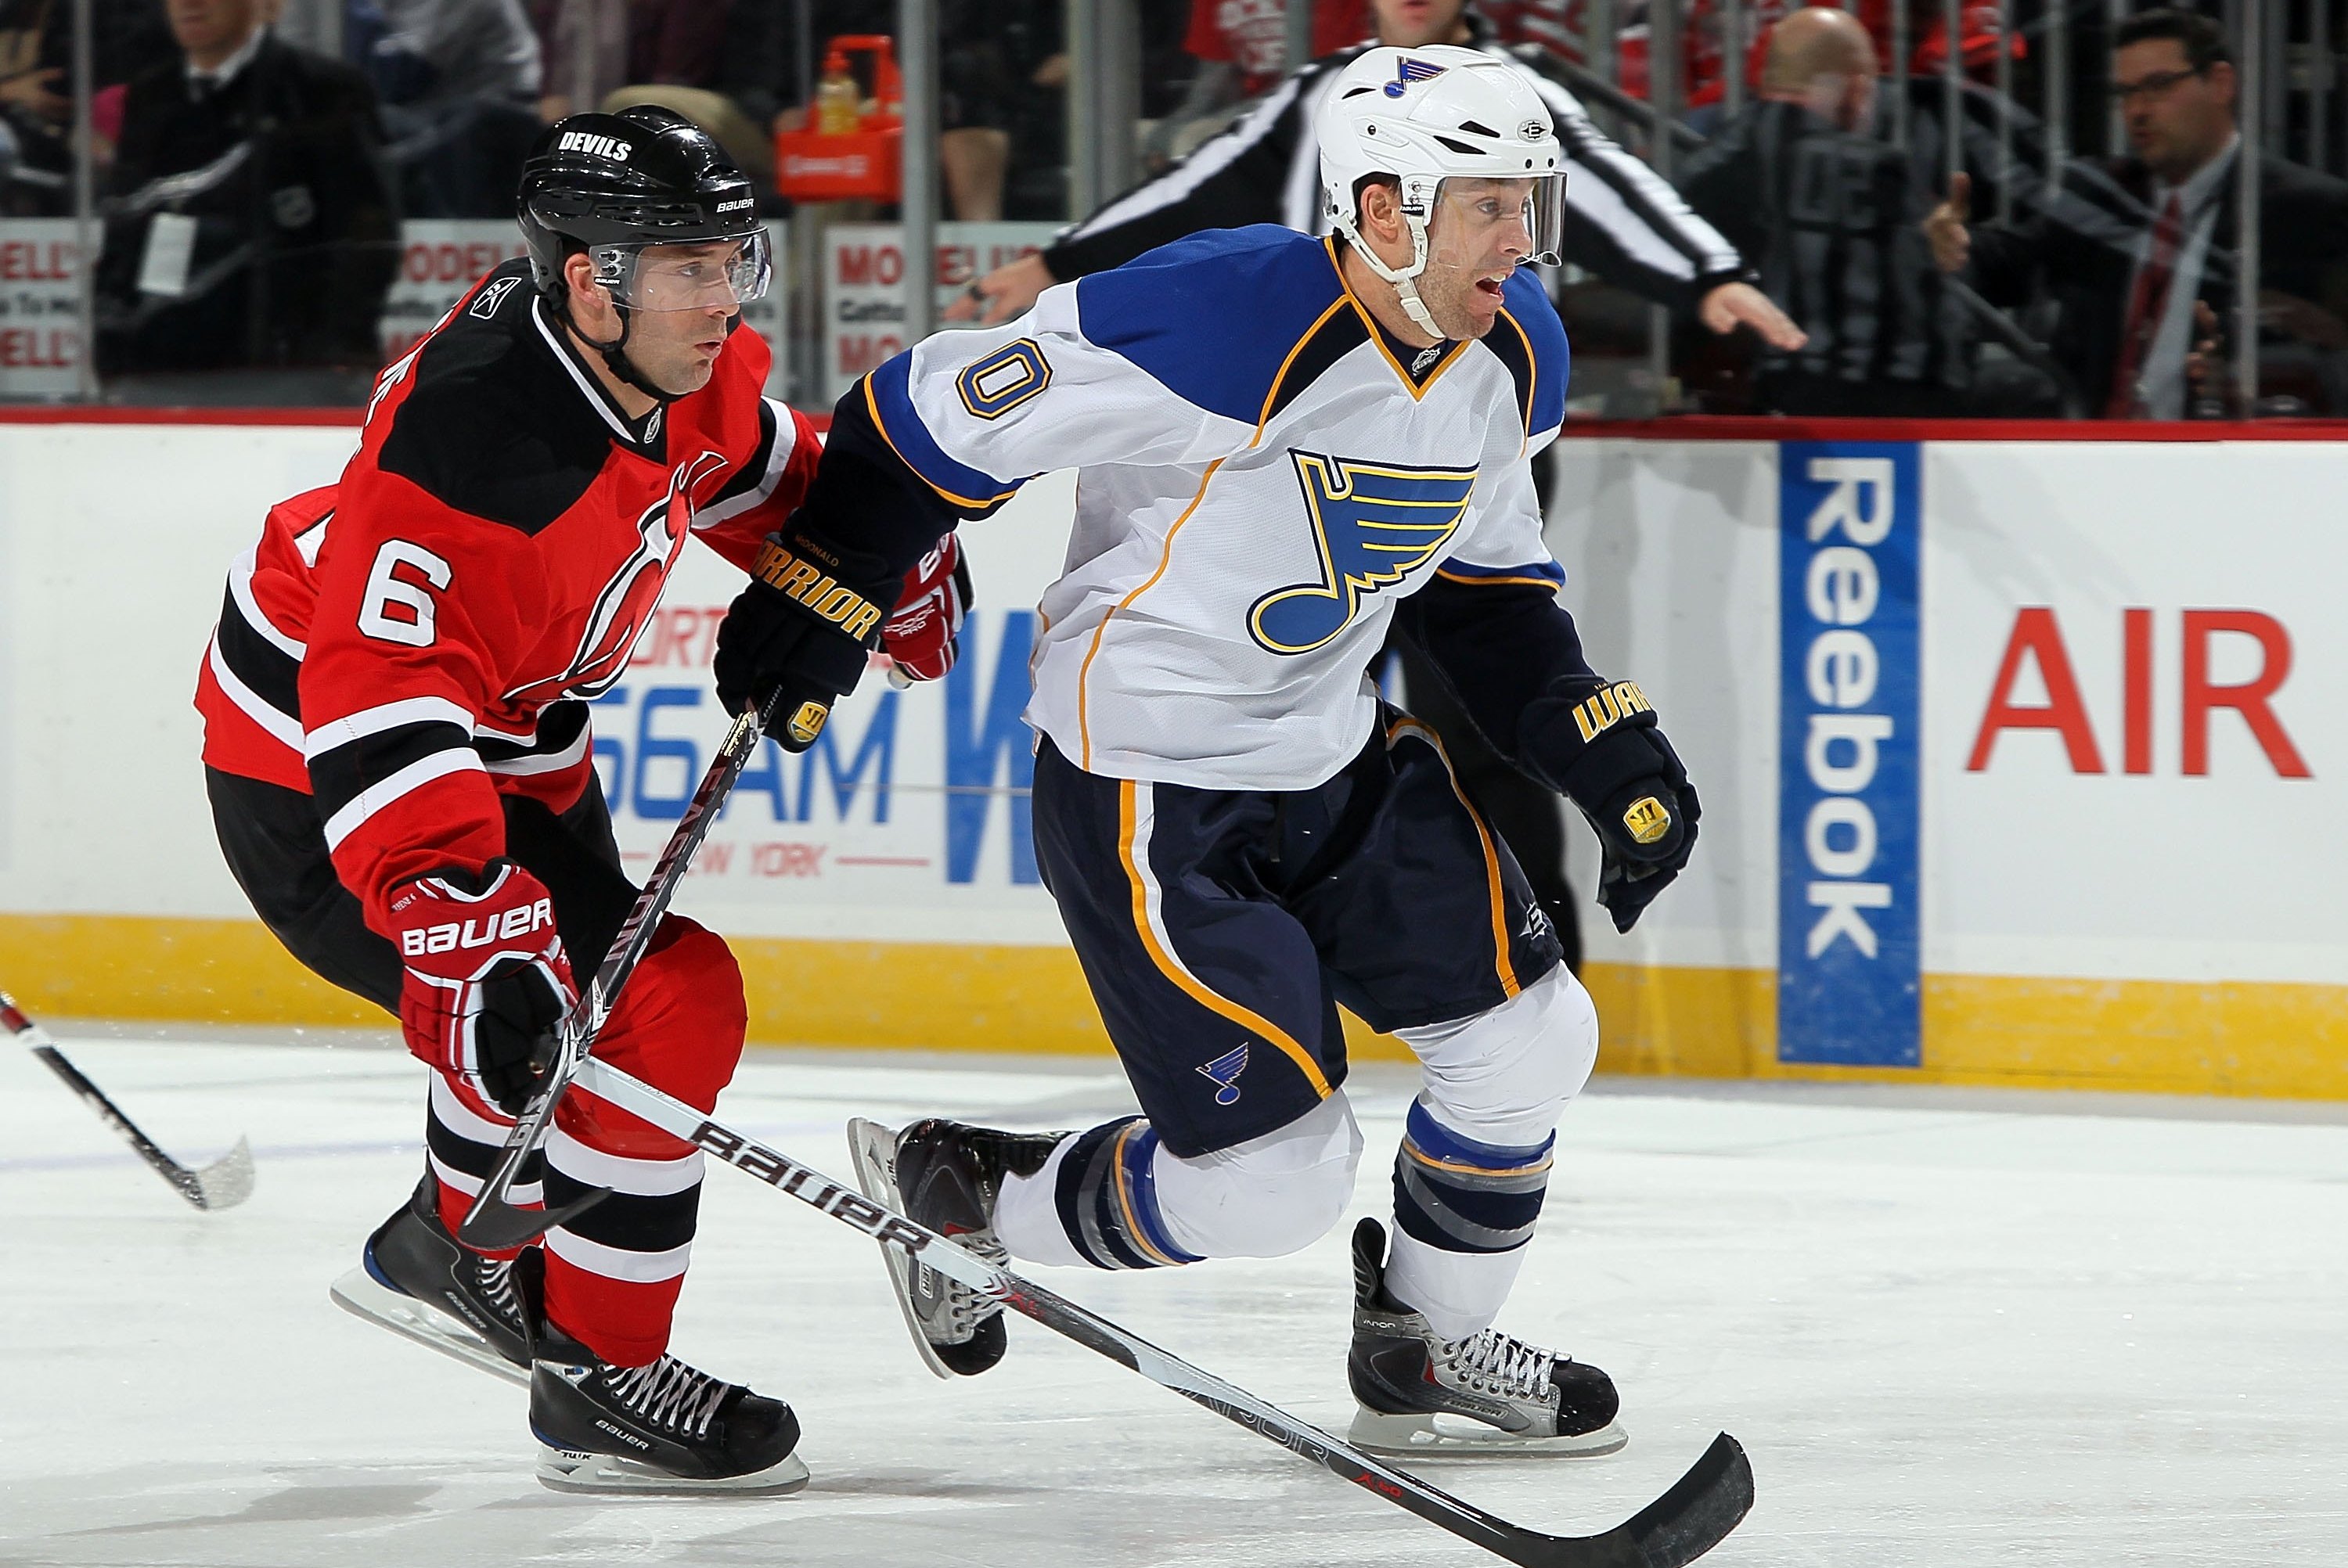 Game Preview: New Jersey Devils vs. St. Louis Blues - All About The Jersey